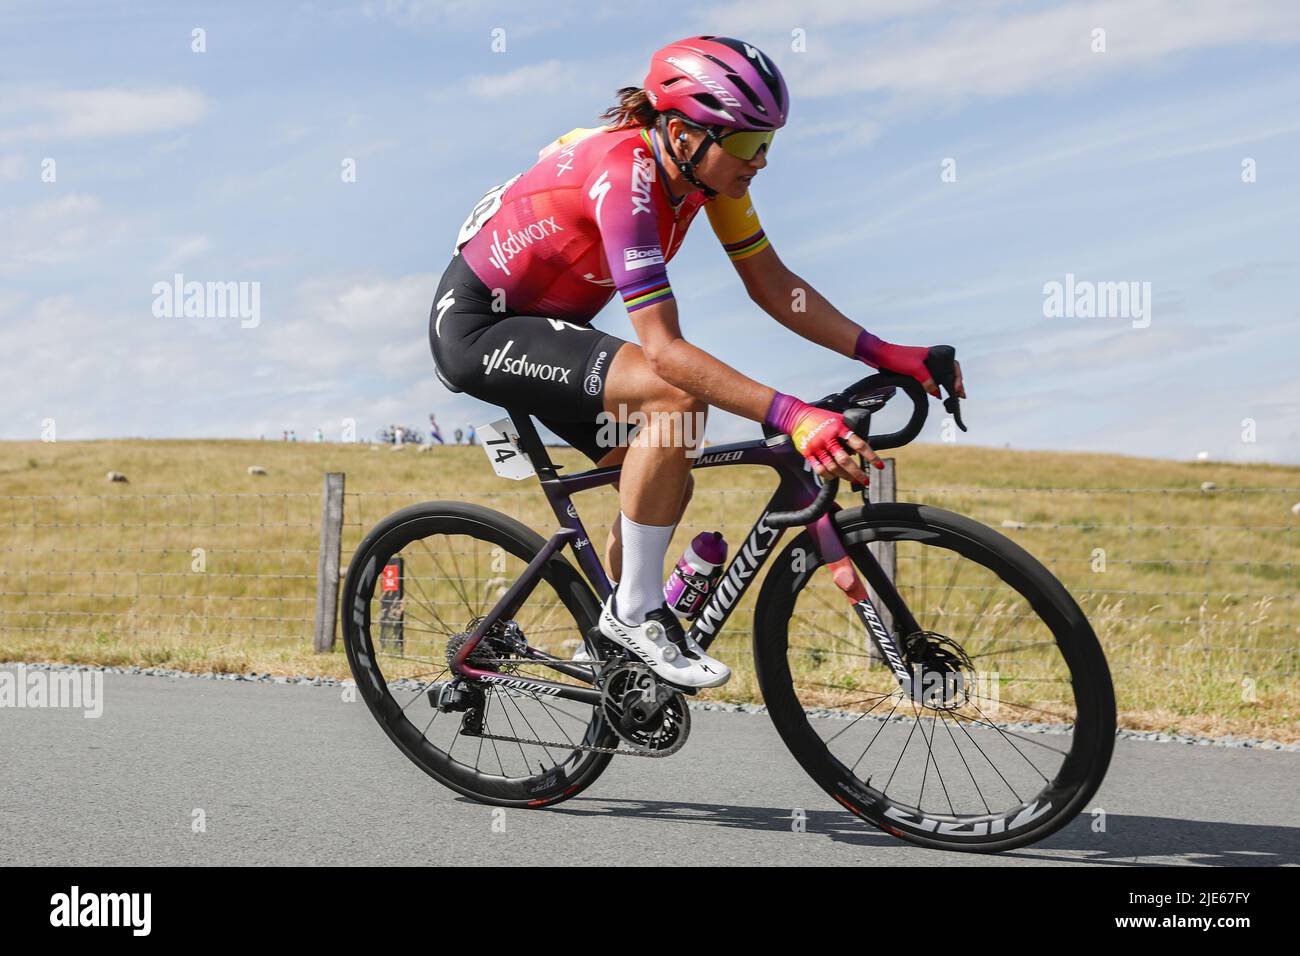 2022-06-25 16:25:36 EMMEN - Cyclist Chantal van den Broek-Blaak in action  during the National Championships Cycling in Drenthe. ANP BAS CZERWINSKI  netherlands out - belgium out Stock Photo - Alamy